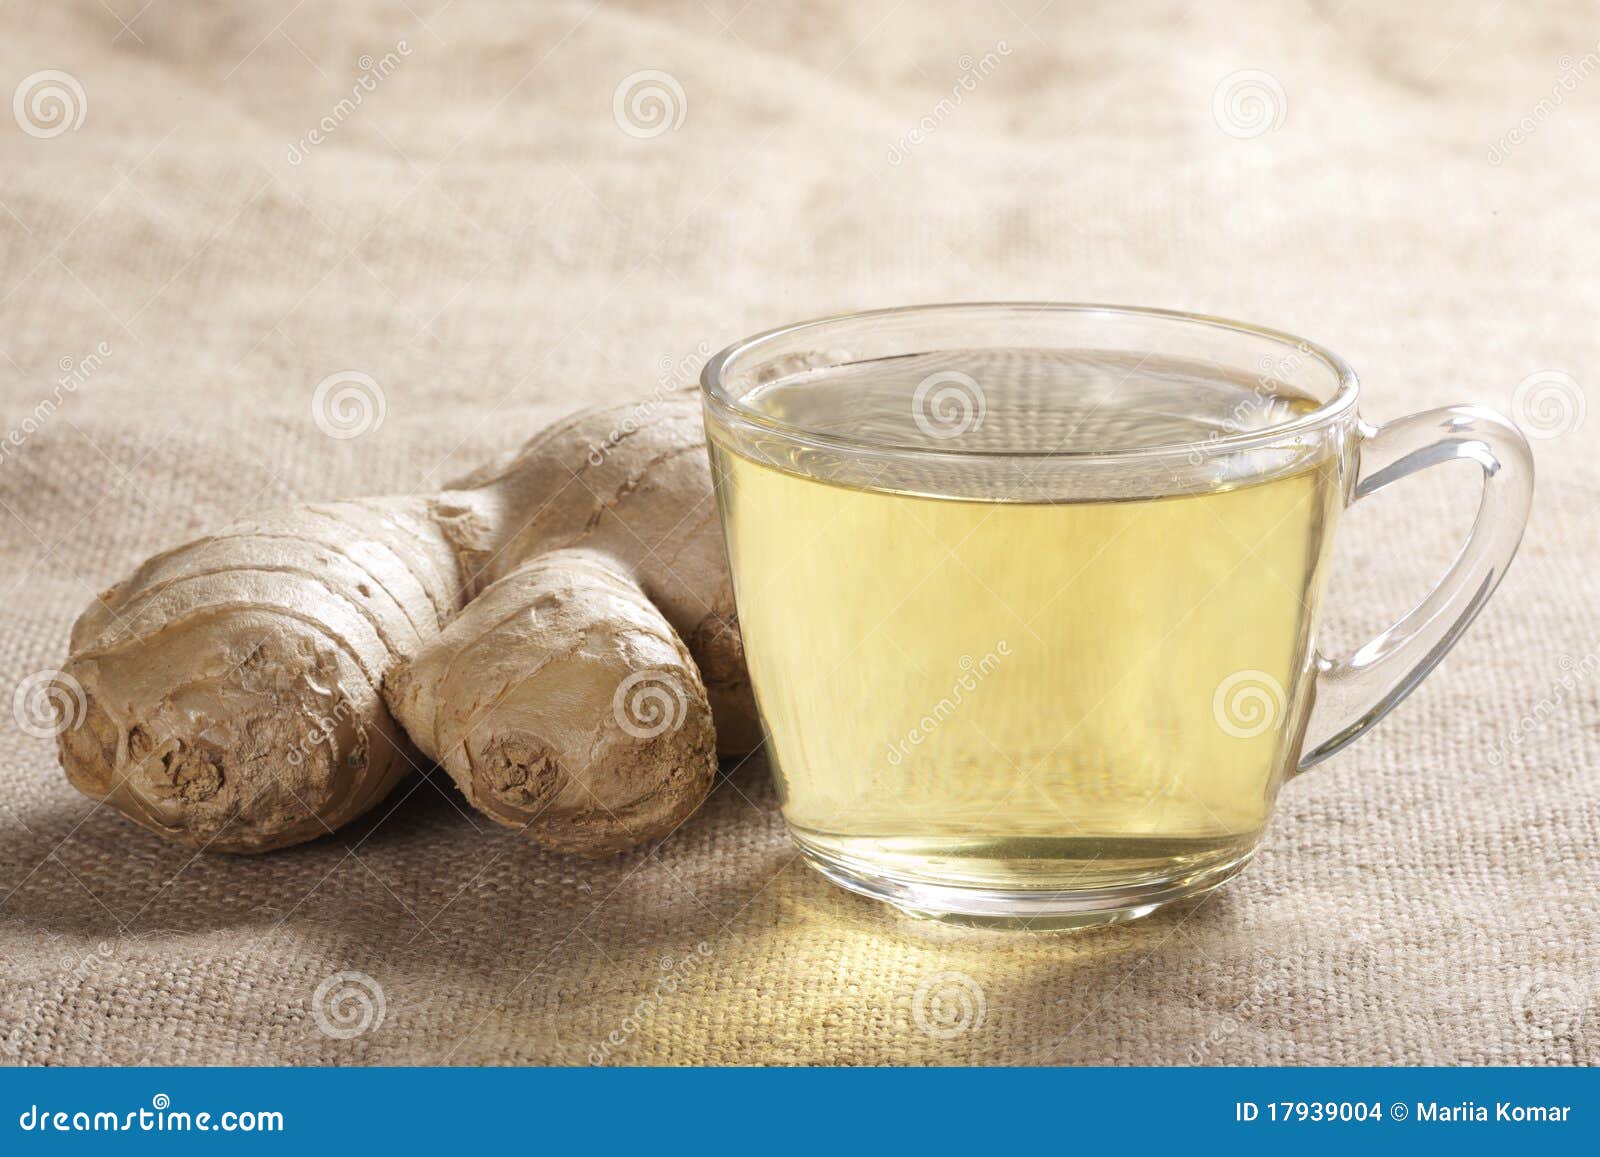 Ginger tea stock photo. Image of color, macro, healthy